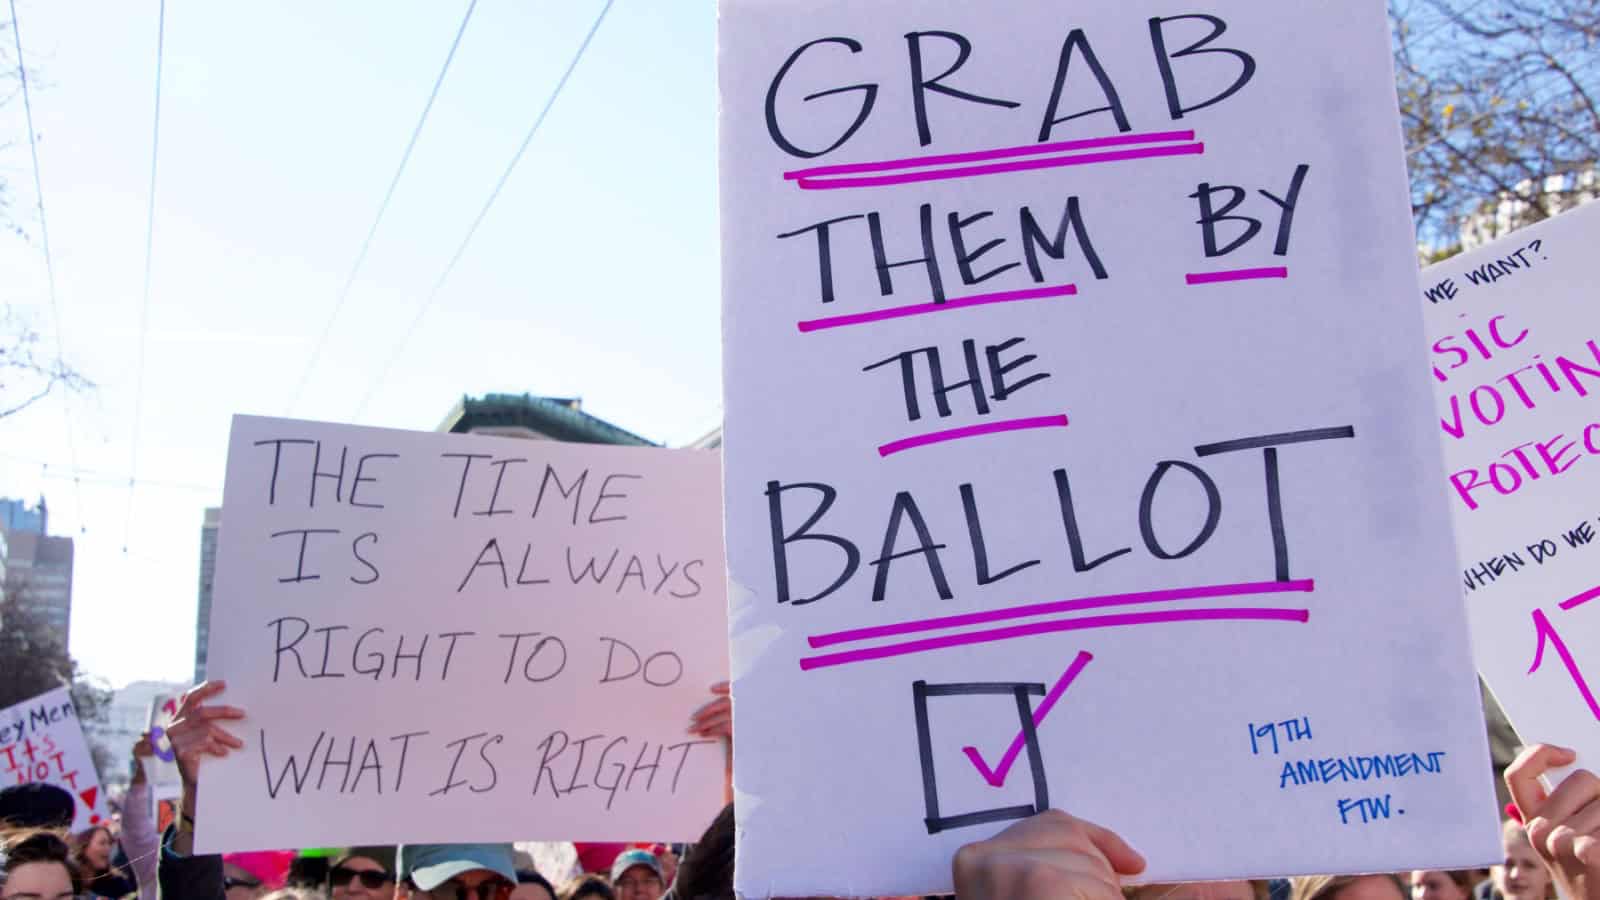 Protest signs. Grab them by the ballot.